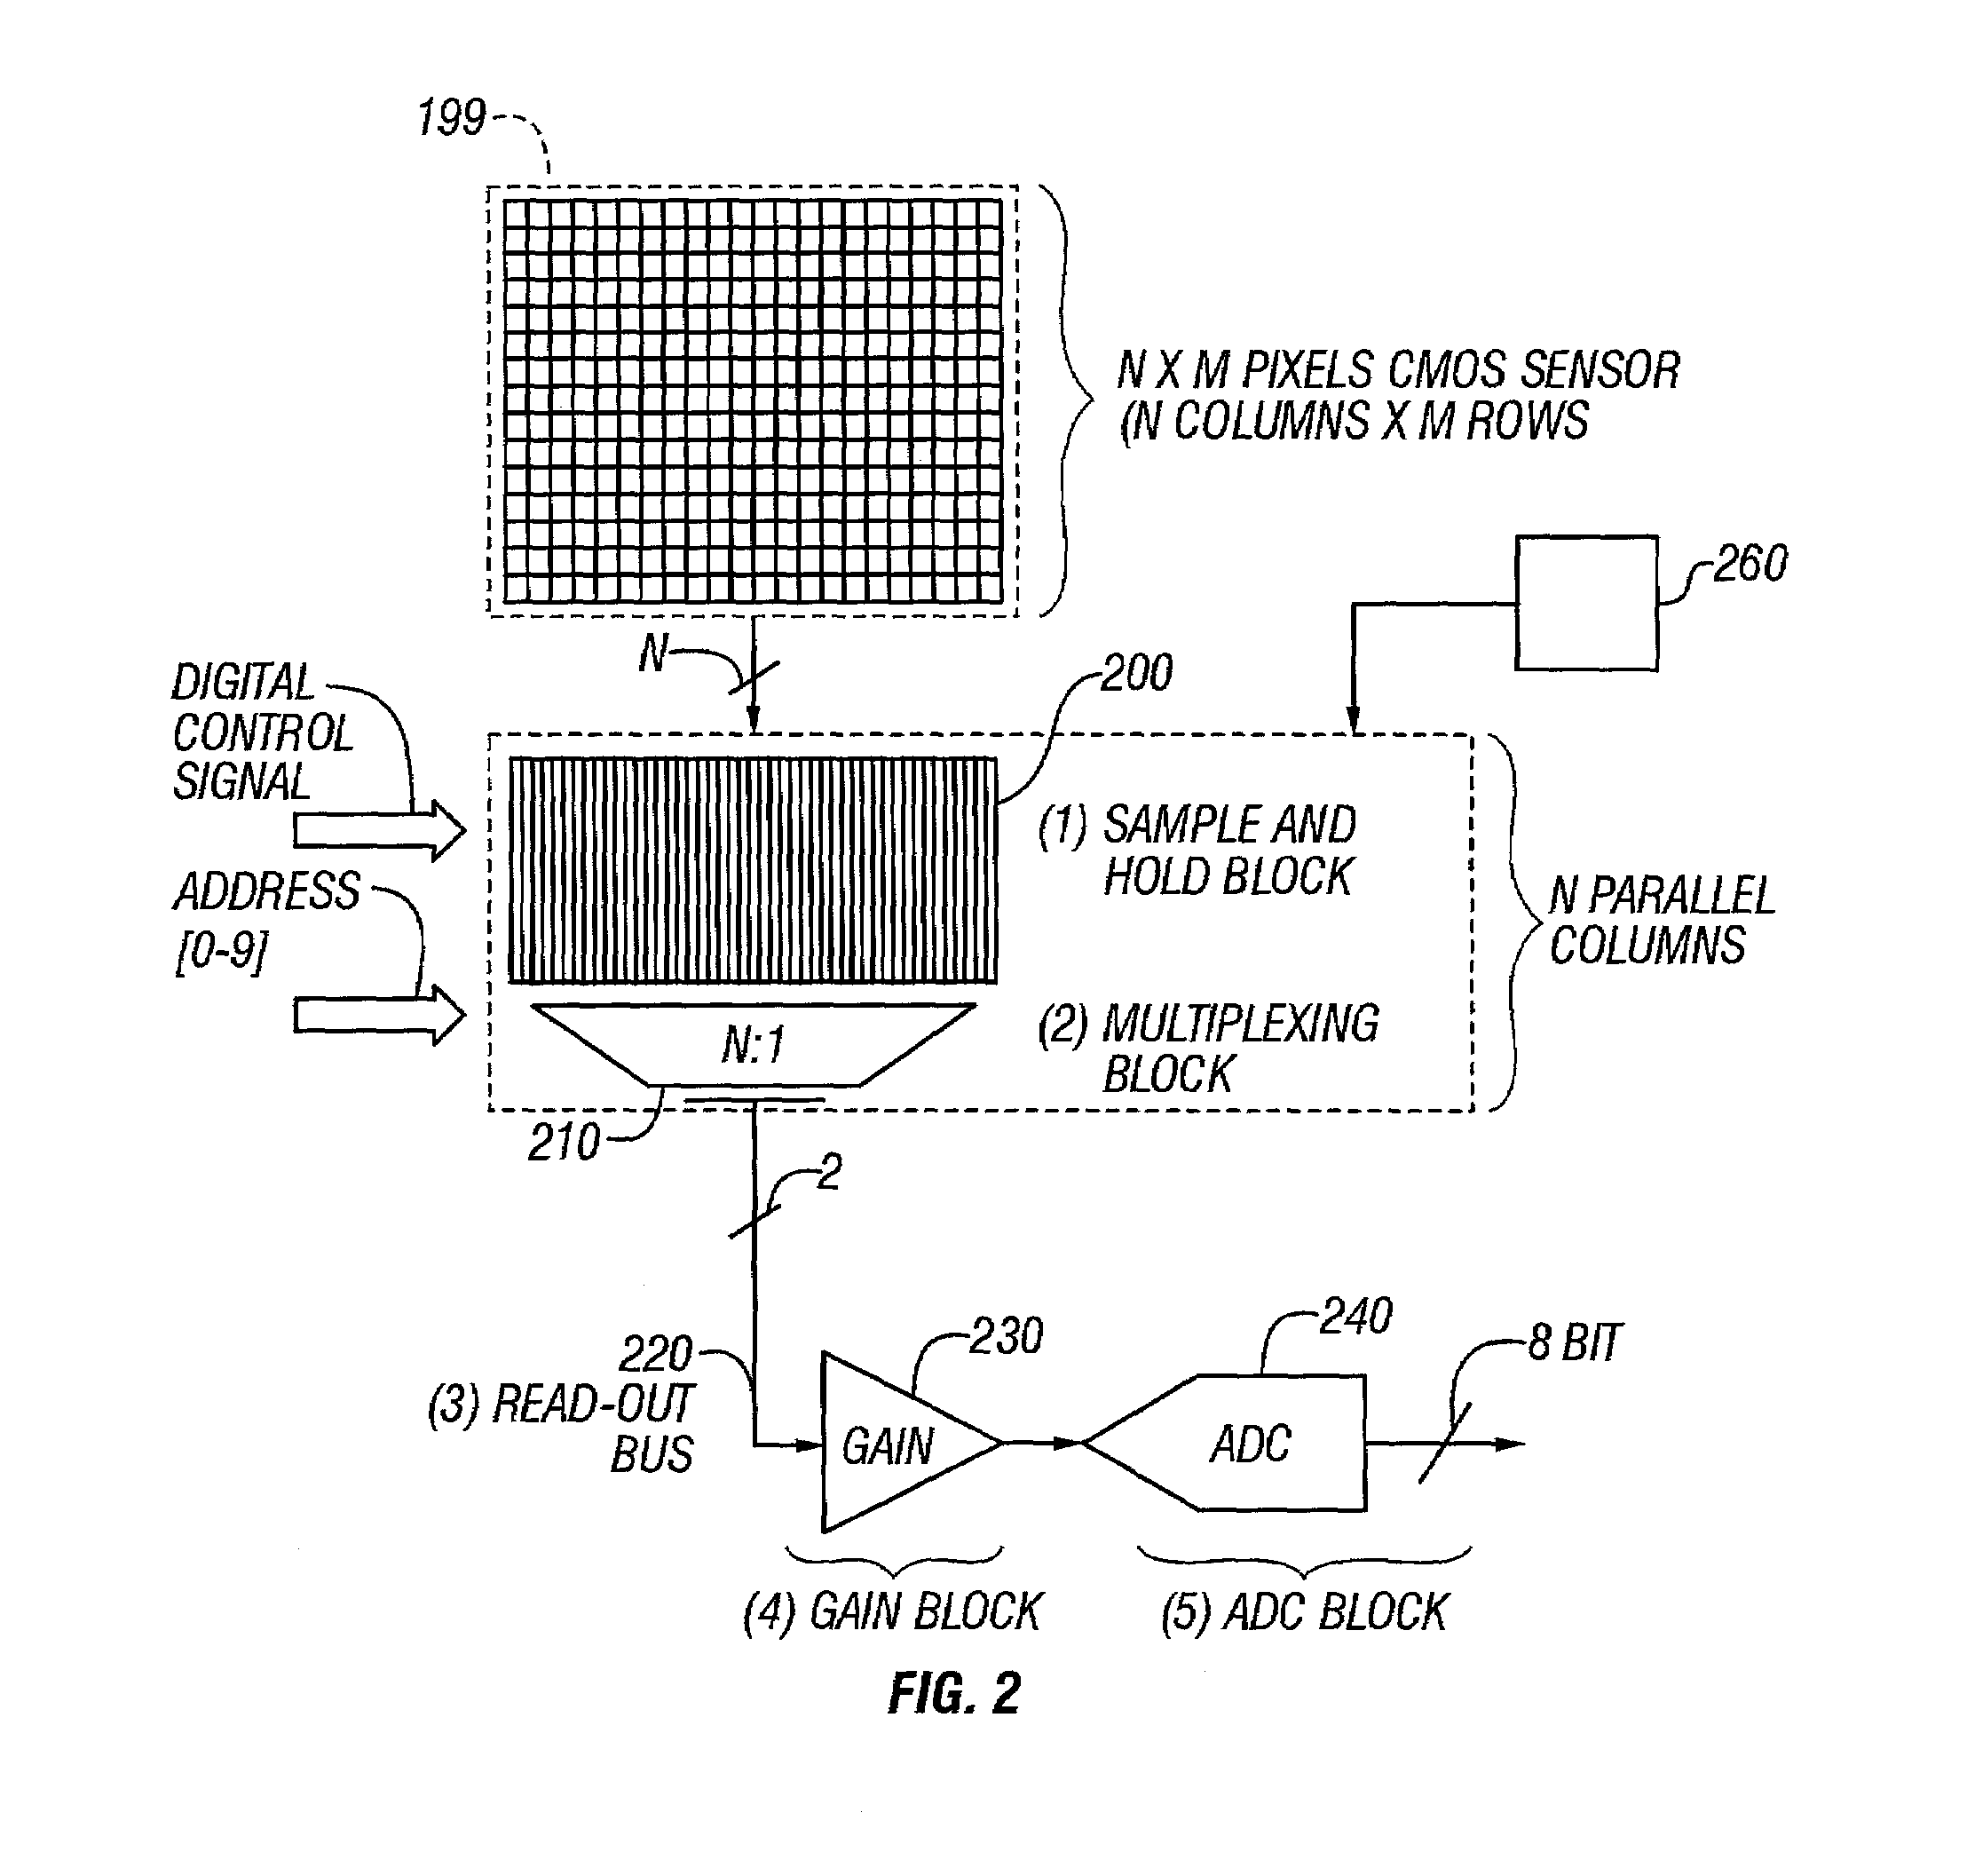 CMOS image sensor with a low-power architecture